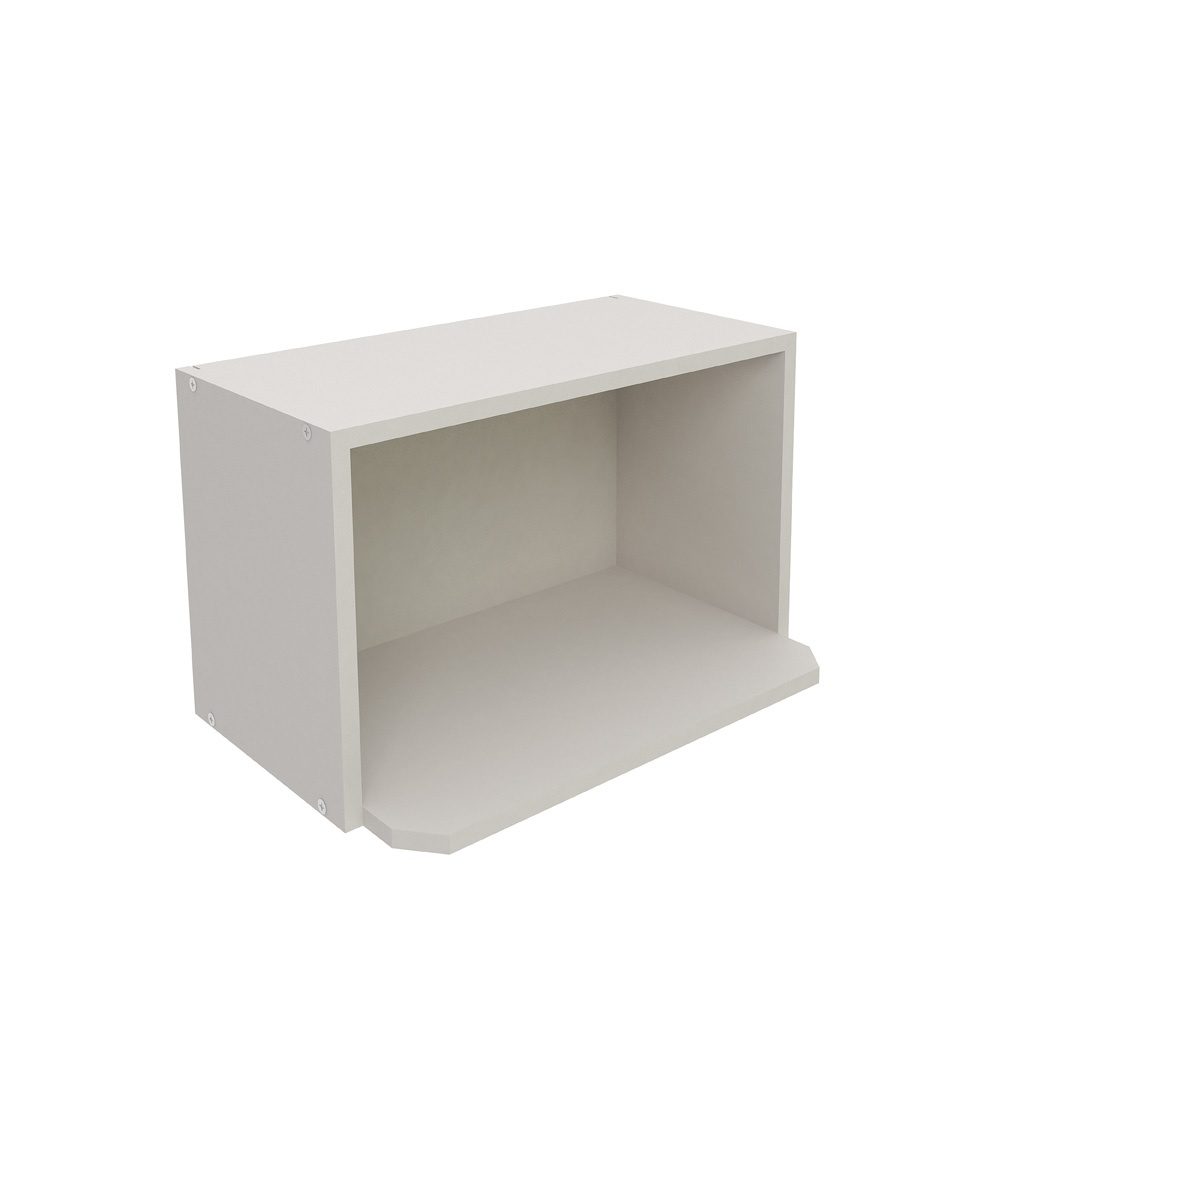 WALL MICROWAVE FINISH CABINET | WMW - OXFORD WHITE (LQ-21704)